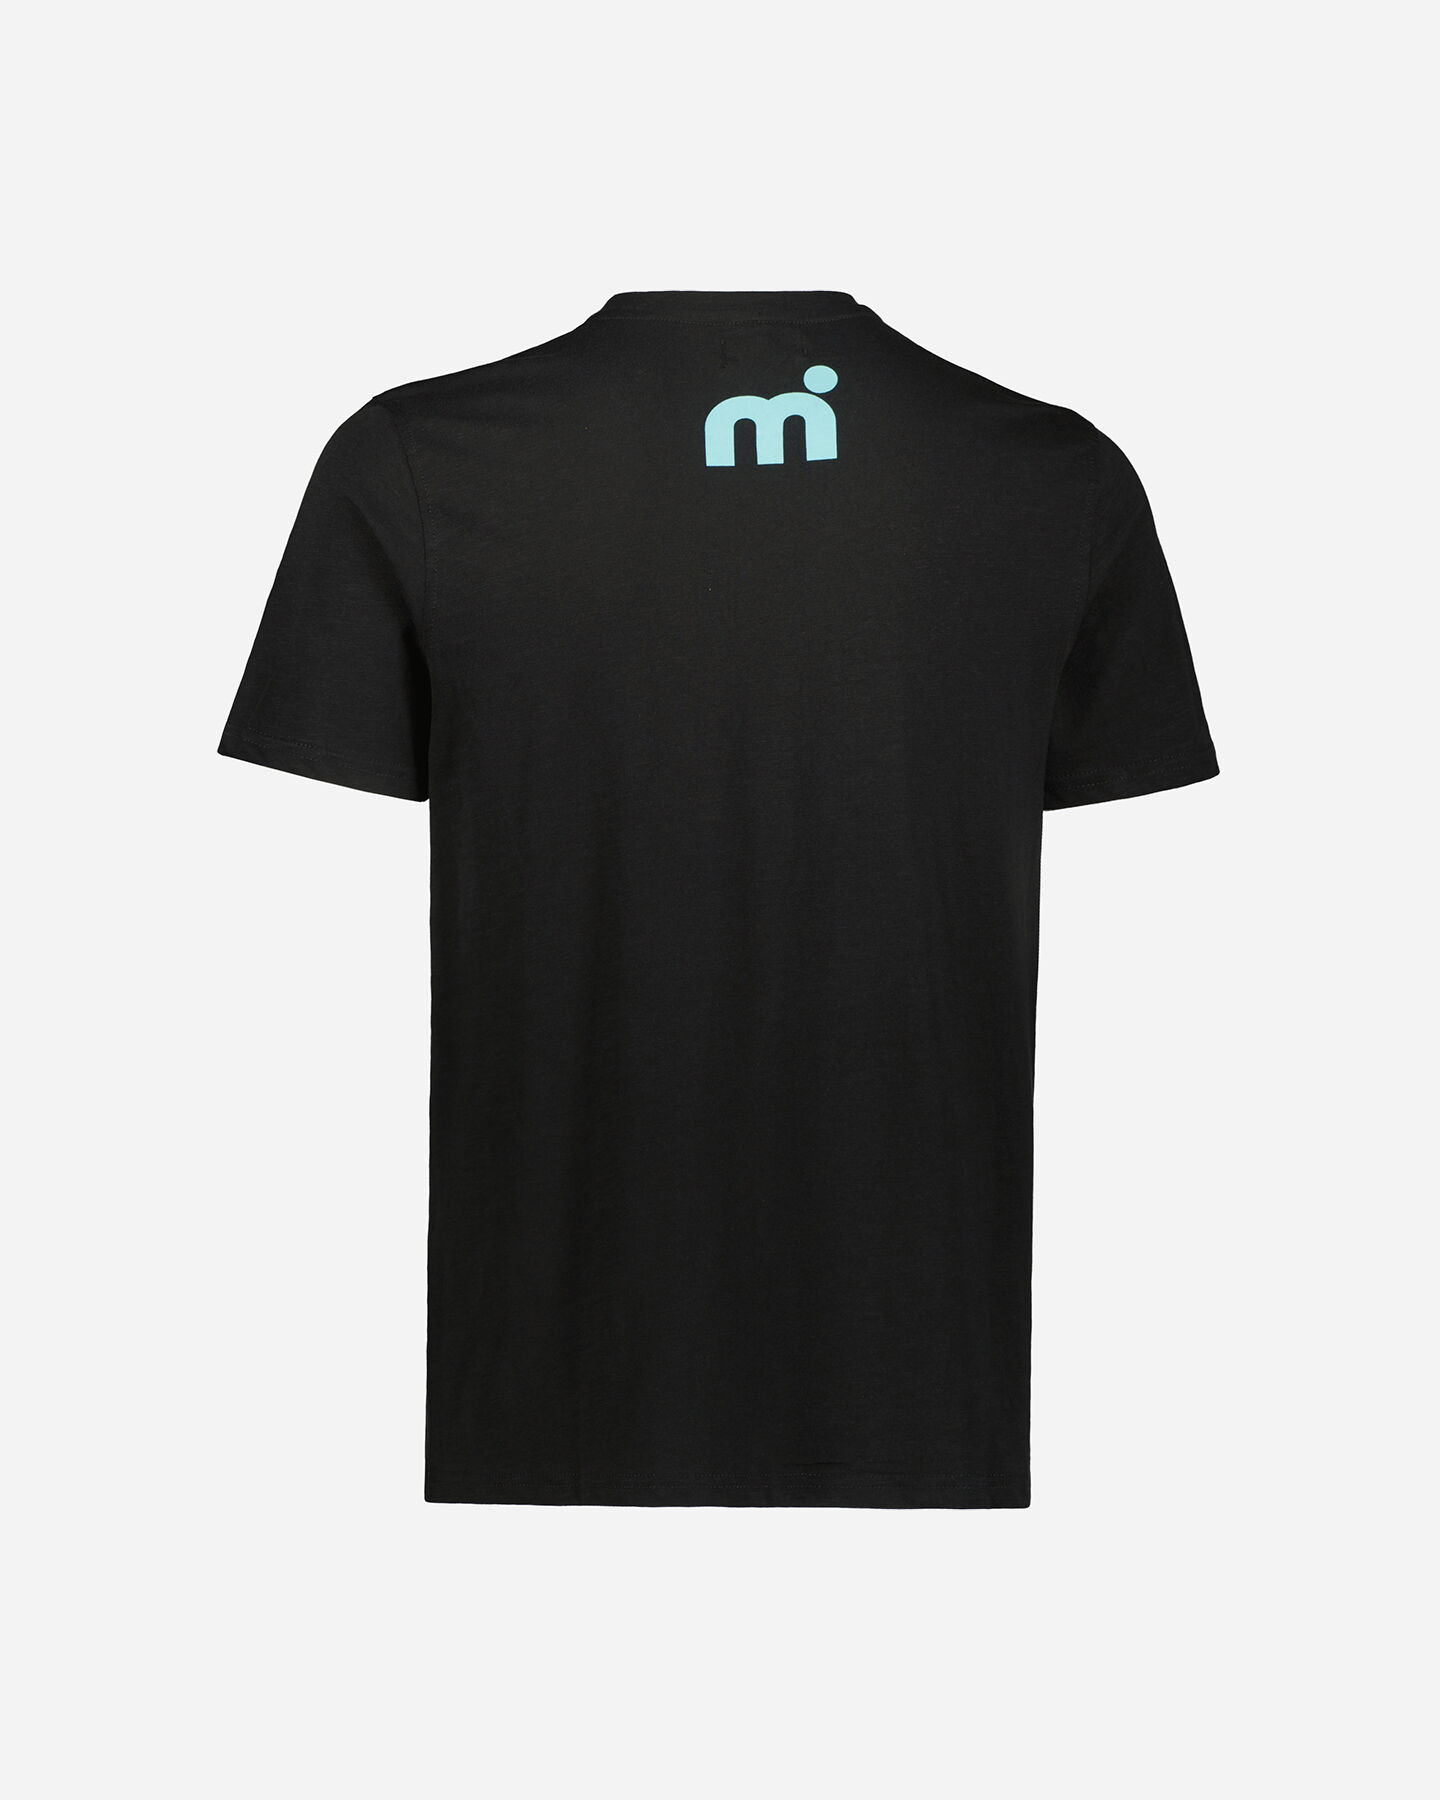  T-Shirt MISTRAL ESSENTIAL M S4121493|050|S scatto 1